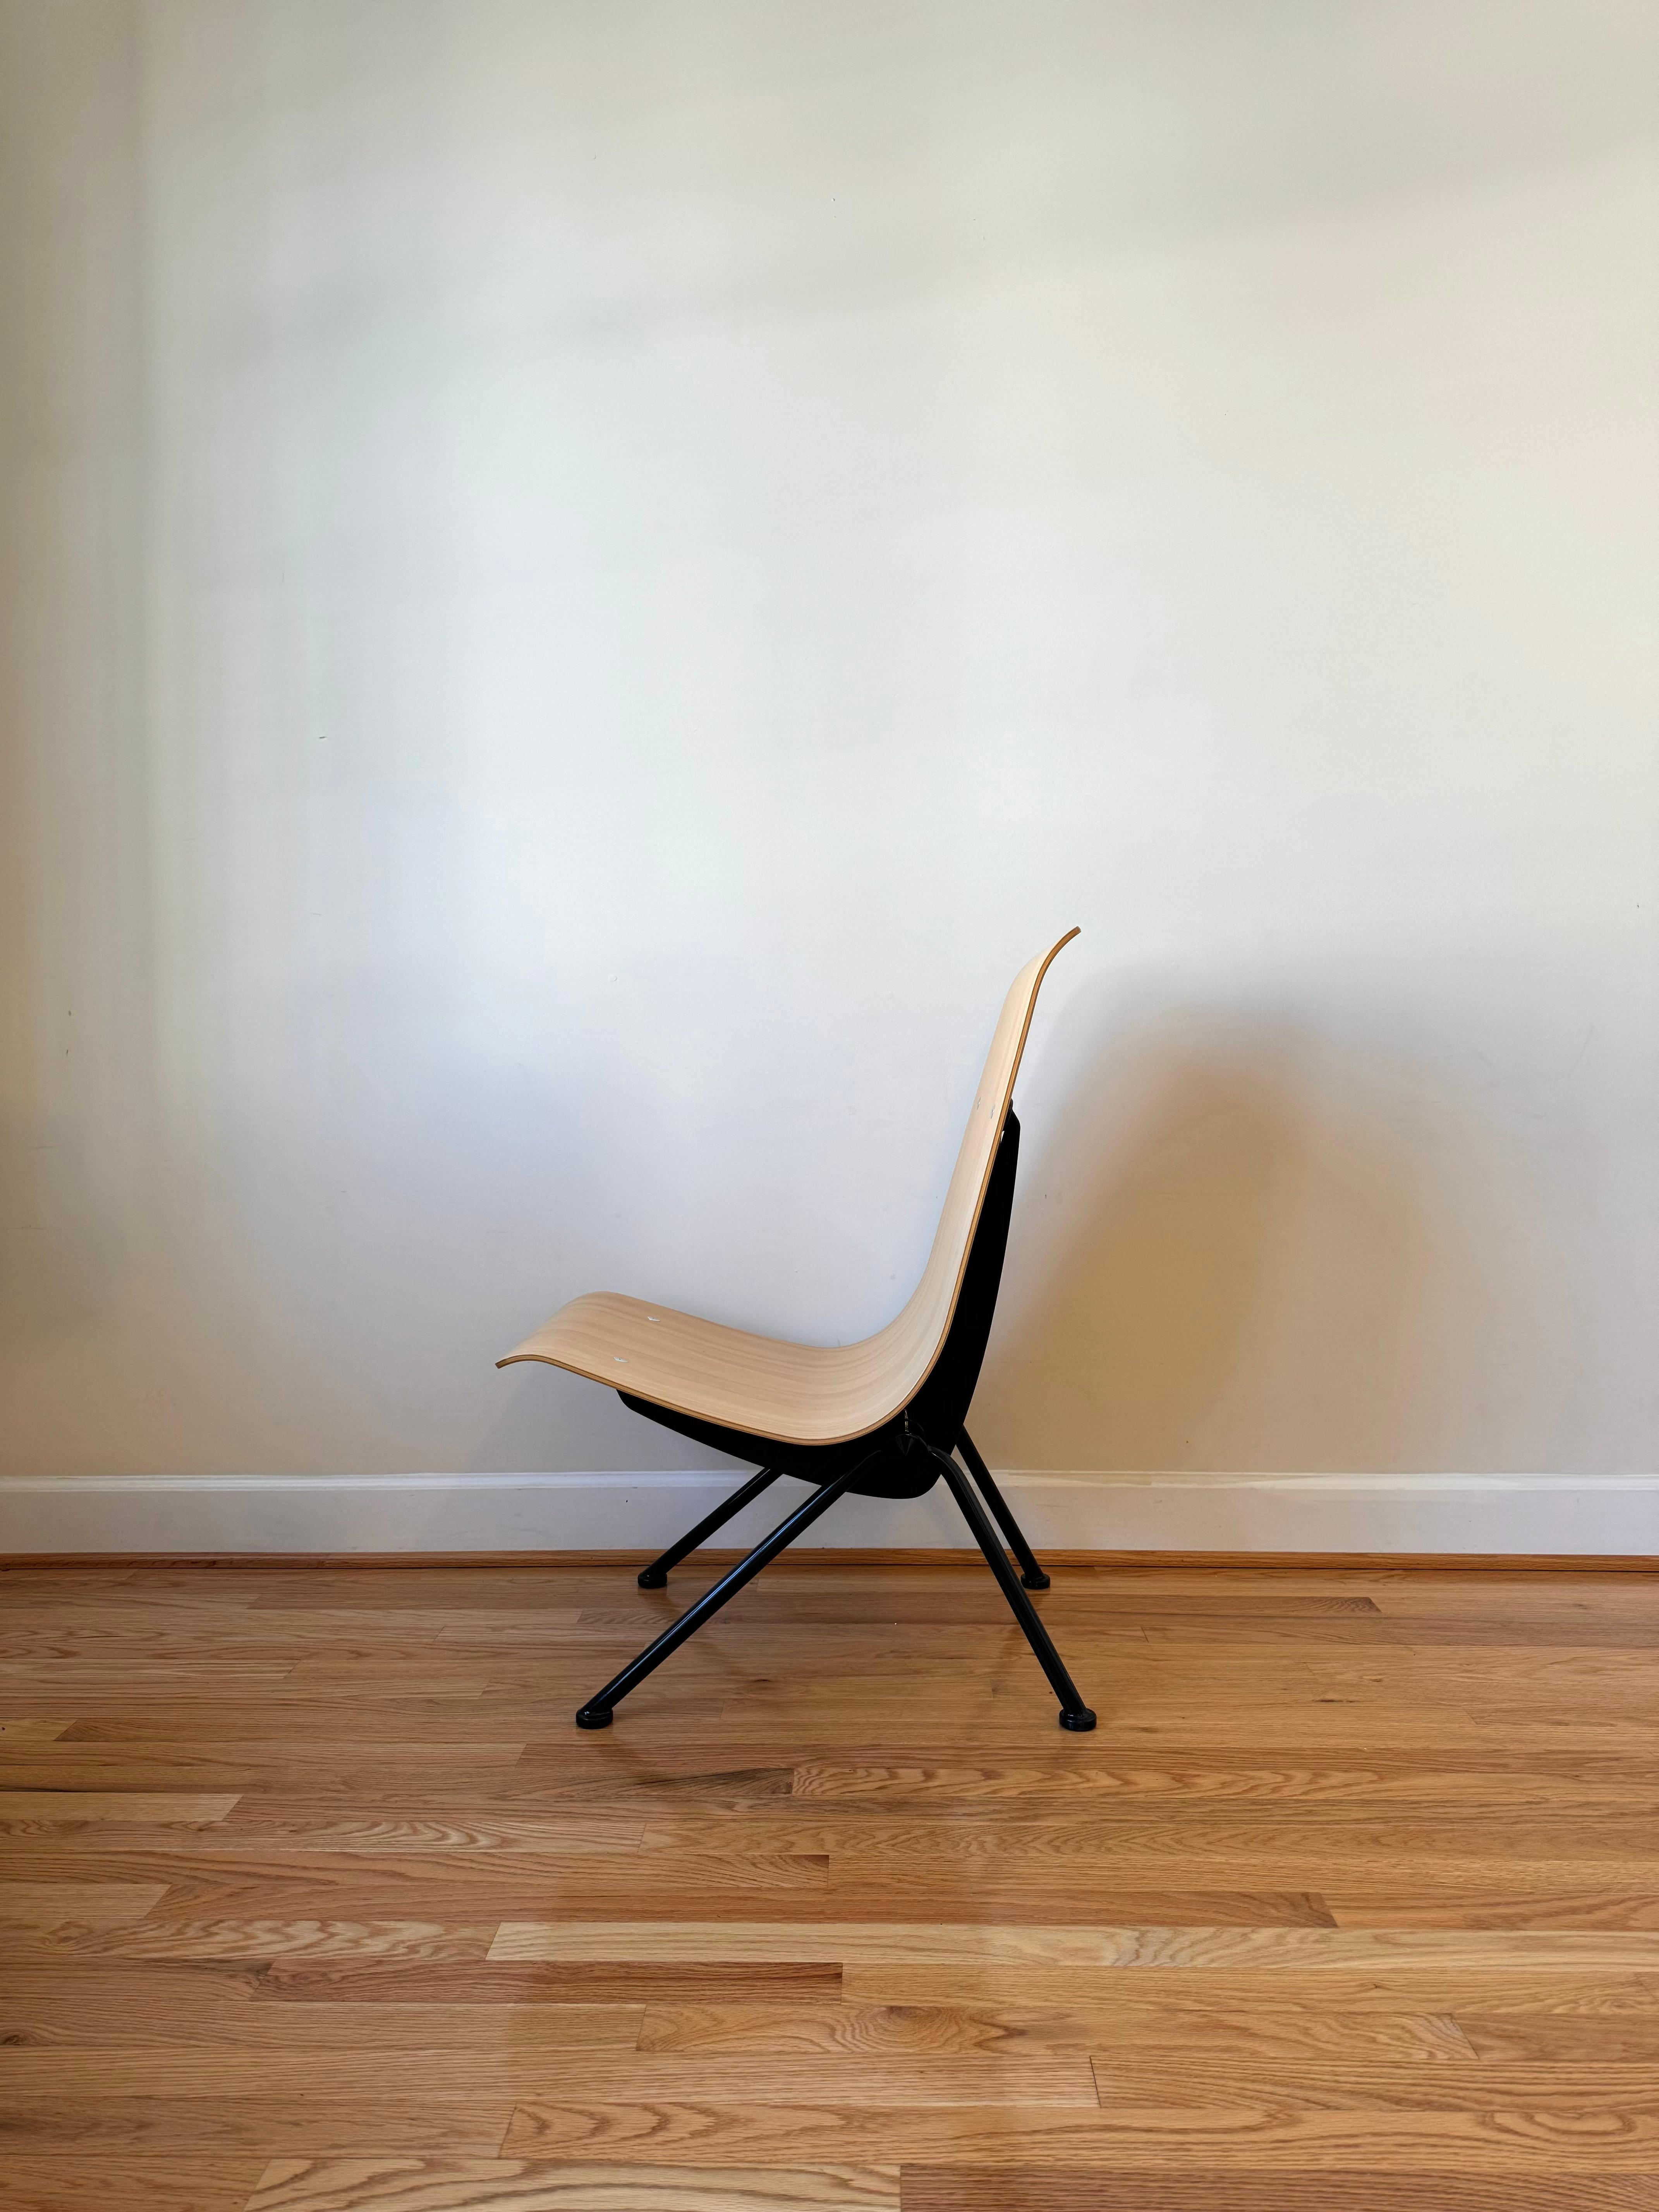 French Antony Chair by Jean Prouvé, Vitra Edition 2002